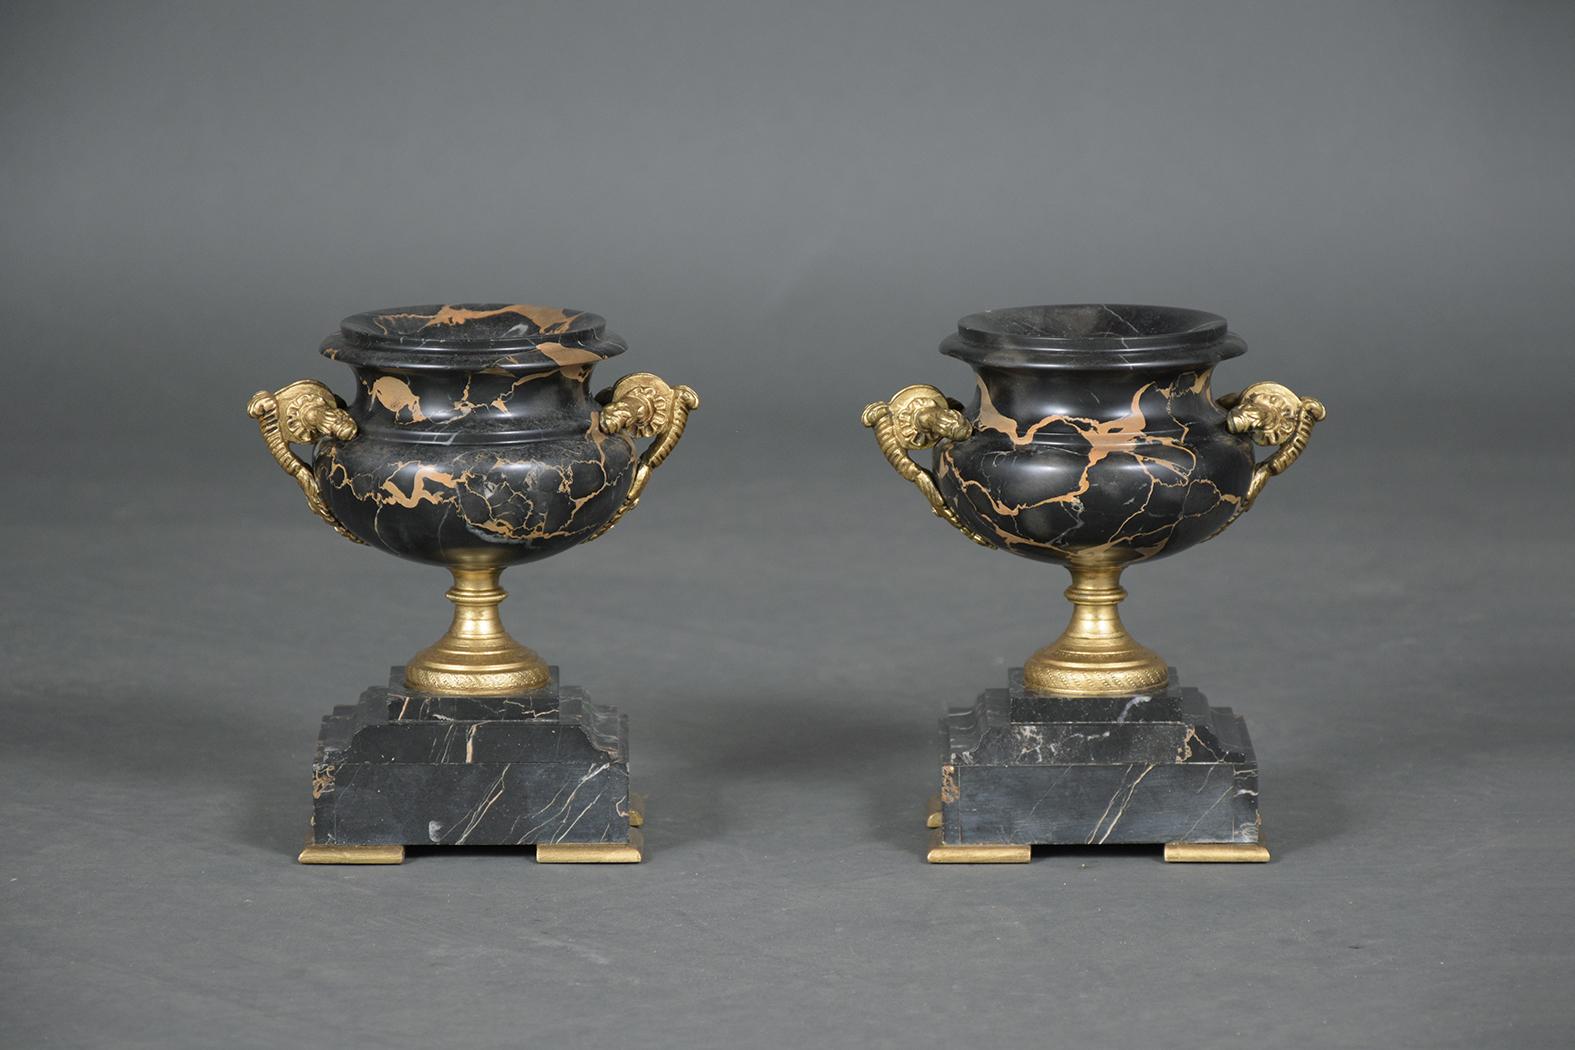 This pair of black gold marble color empire urns are beautifully handcrafted, with large brass handles and accents, and are ready to be used in any home for years to come.